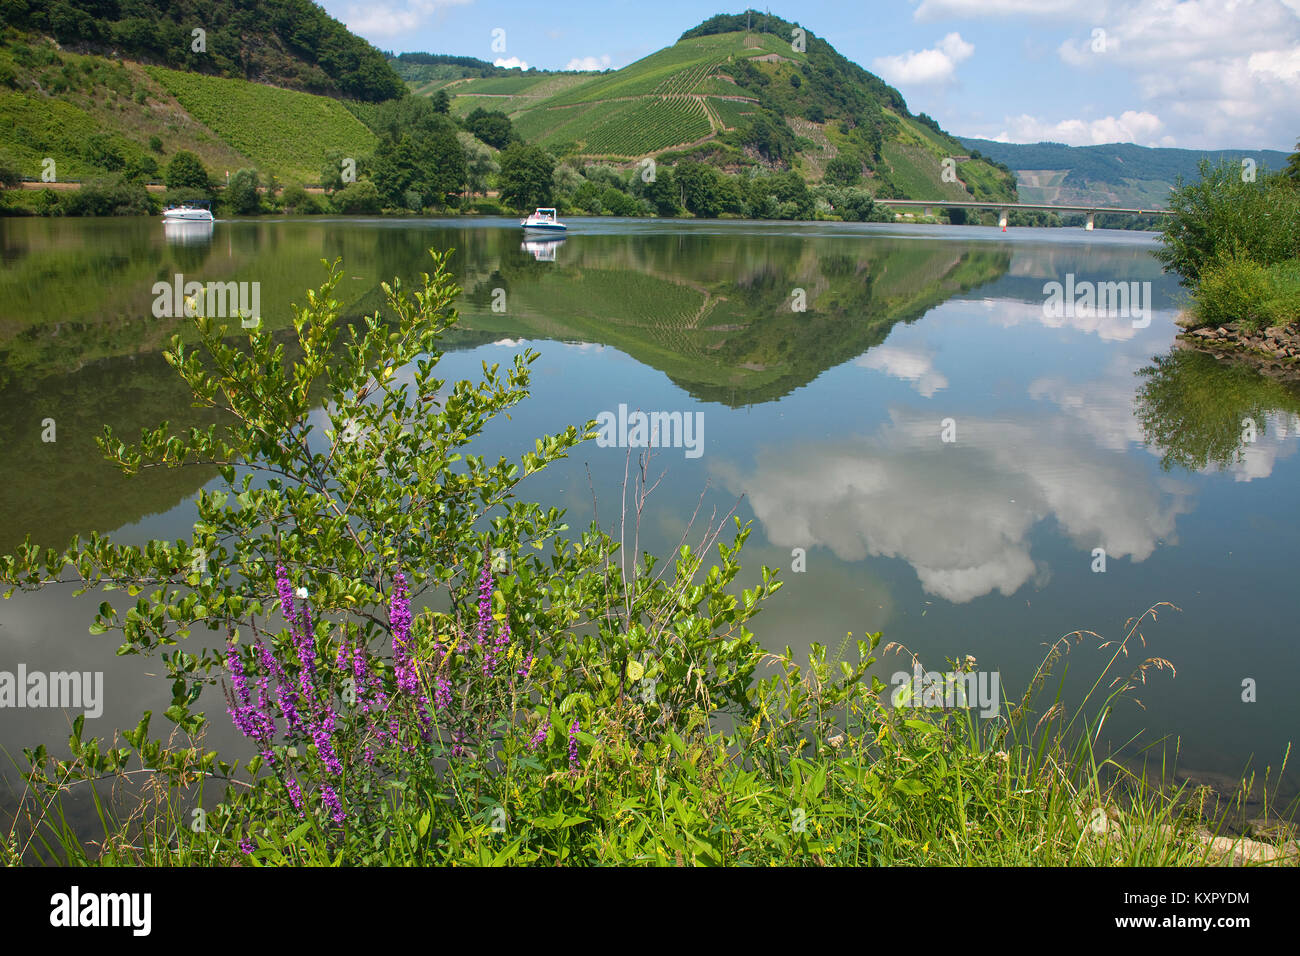 Motor boats on Moselle river, shore with wild flowers, Neumagen-Dhron, Moselle river, Rhineland-Palatinate, Germany, Europe Stock Photo